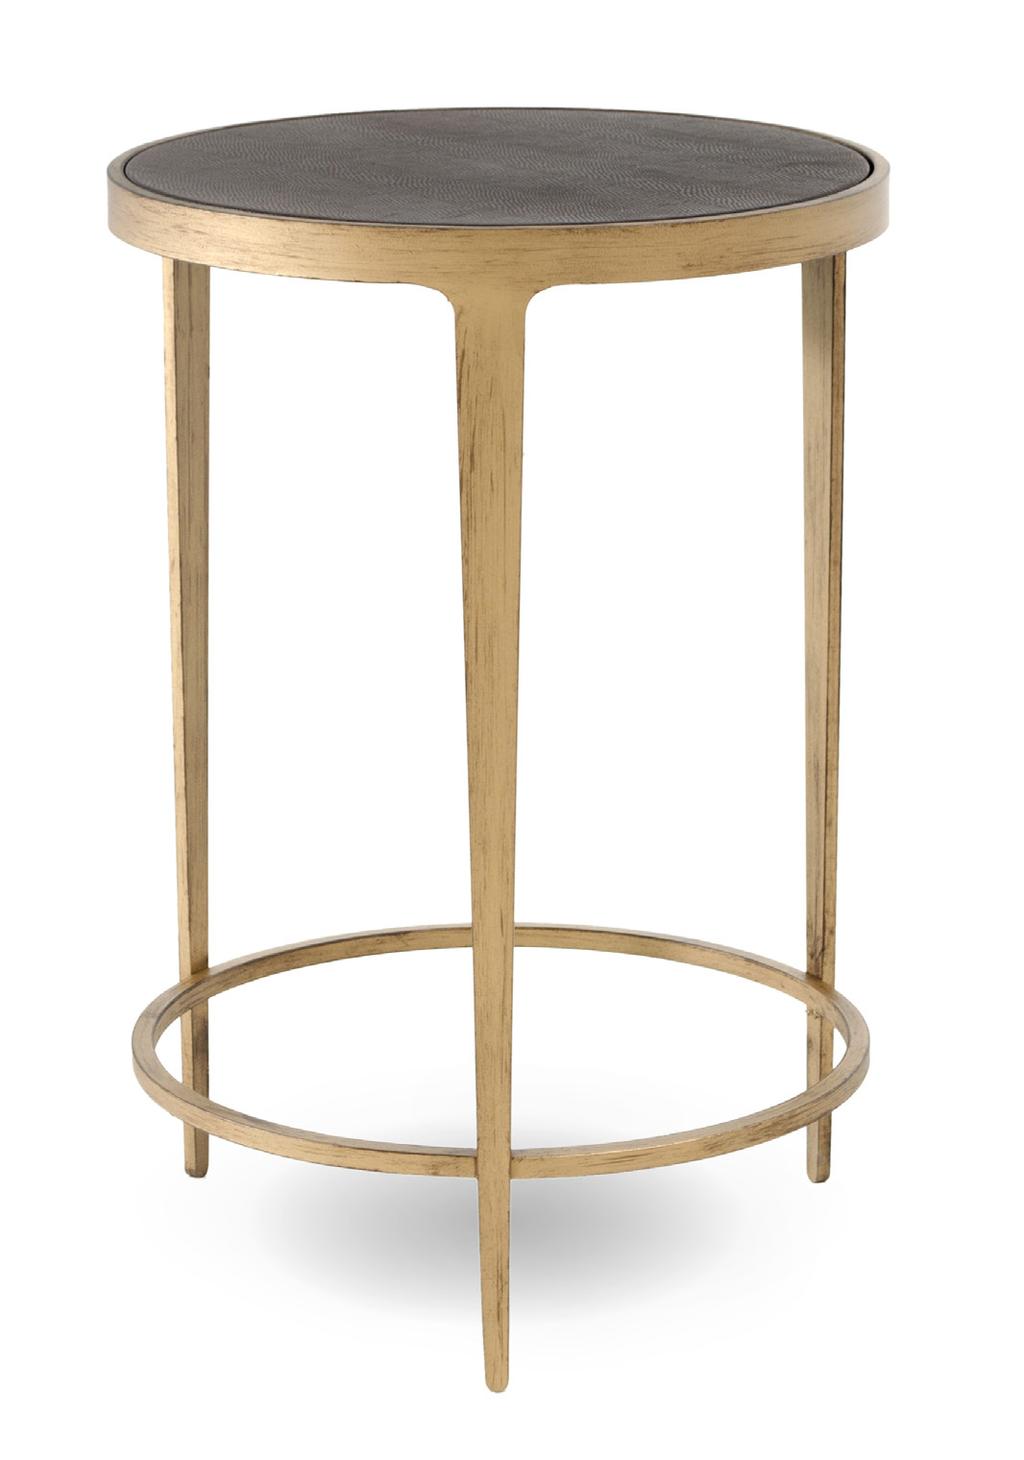 CF Finds Limited Edition Tops 7496 Limited Edition Roundabout Drink Table with Leather Top Table Dia.